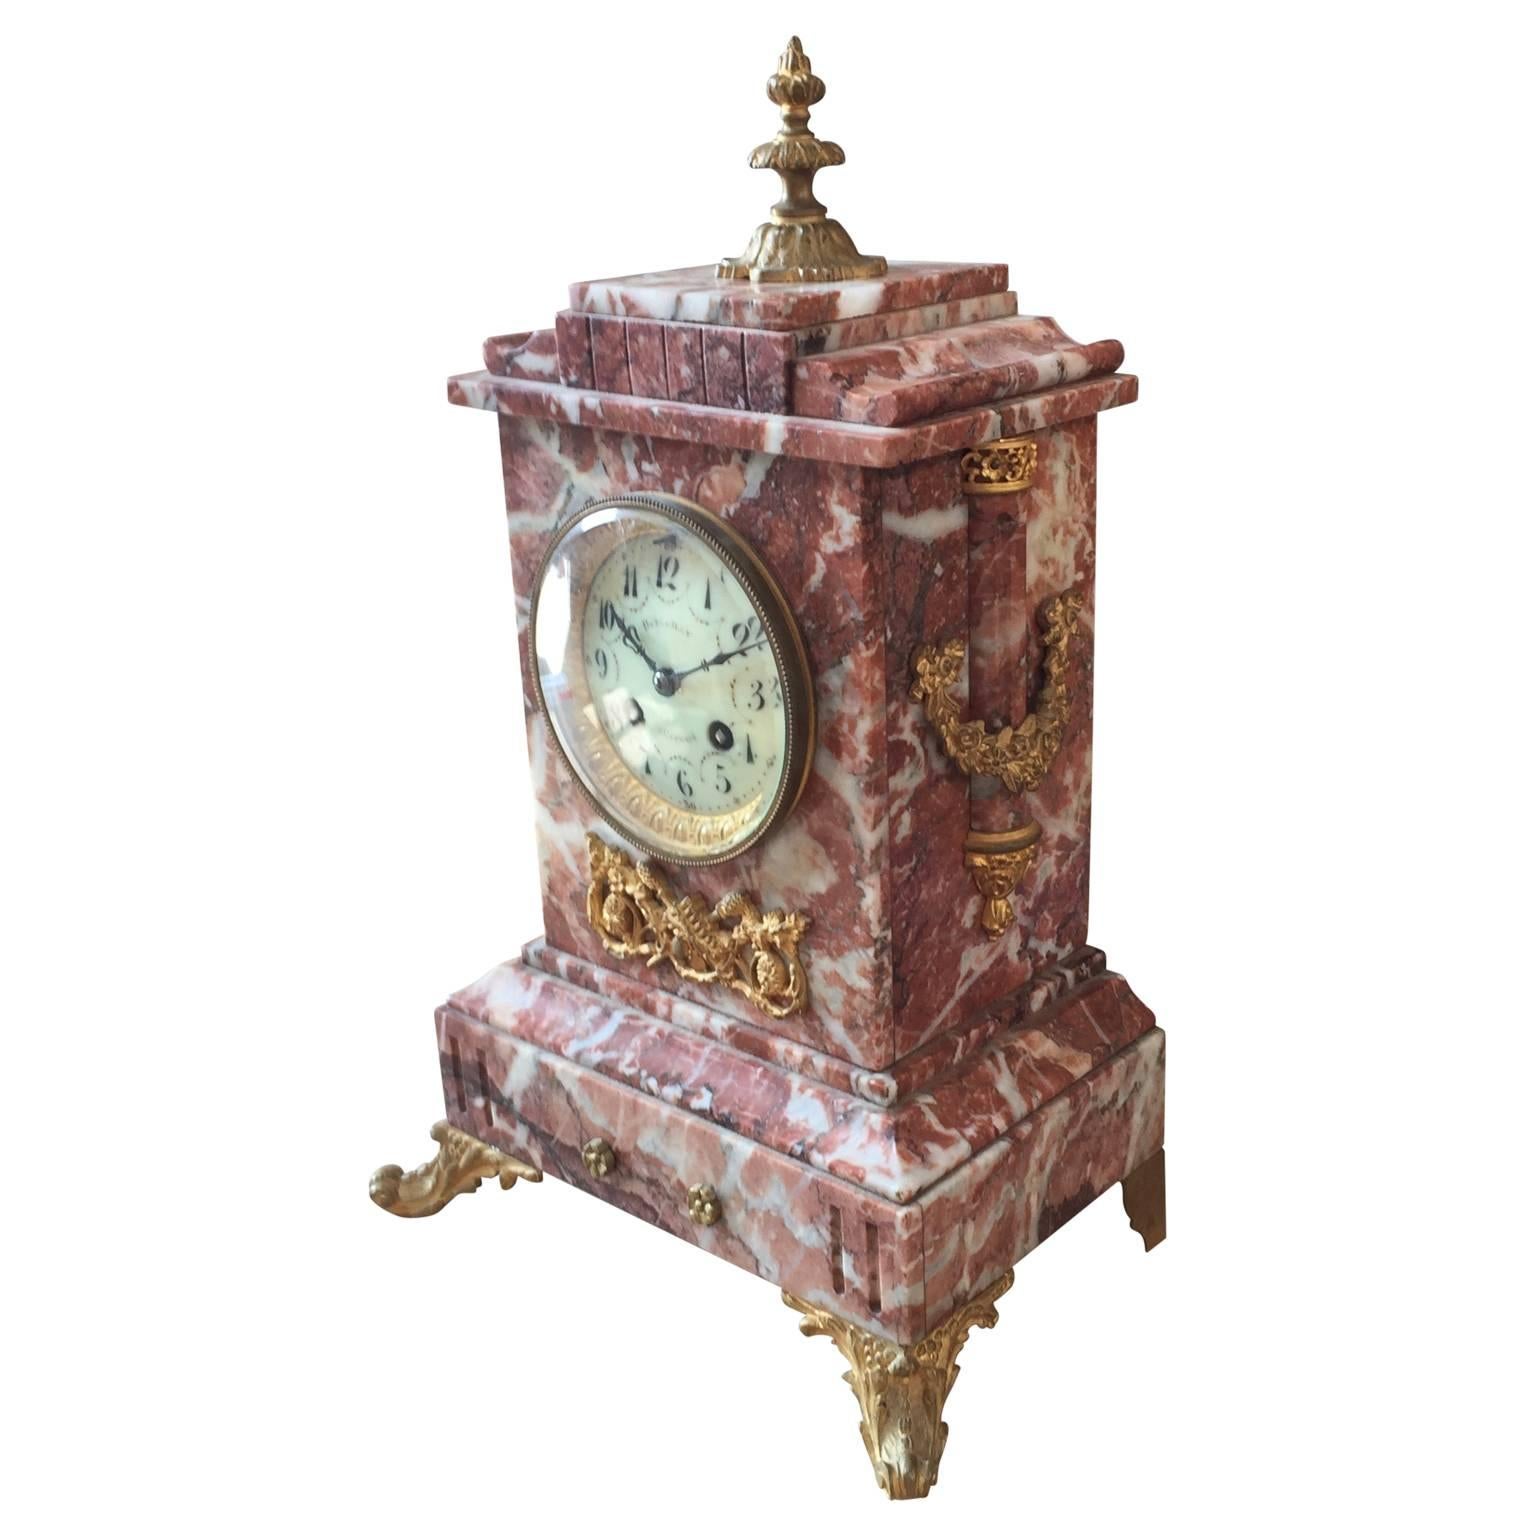 Red marble mantel clock mounted with ormolu hardware.